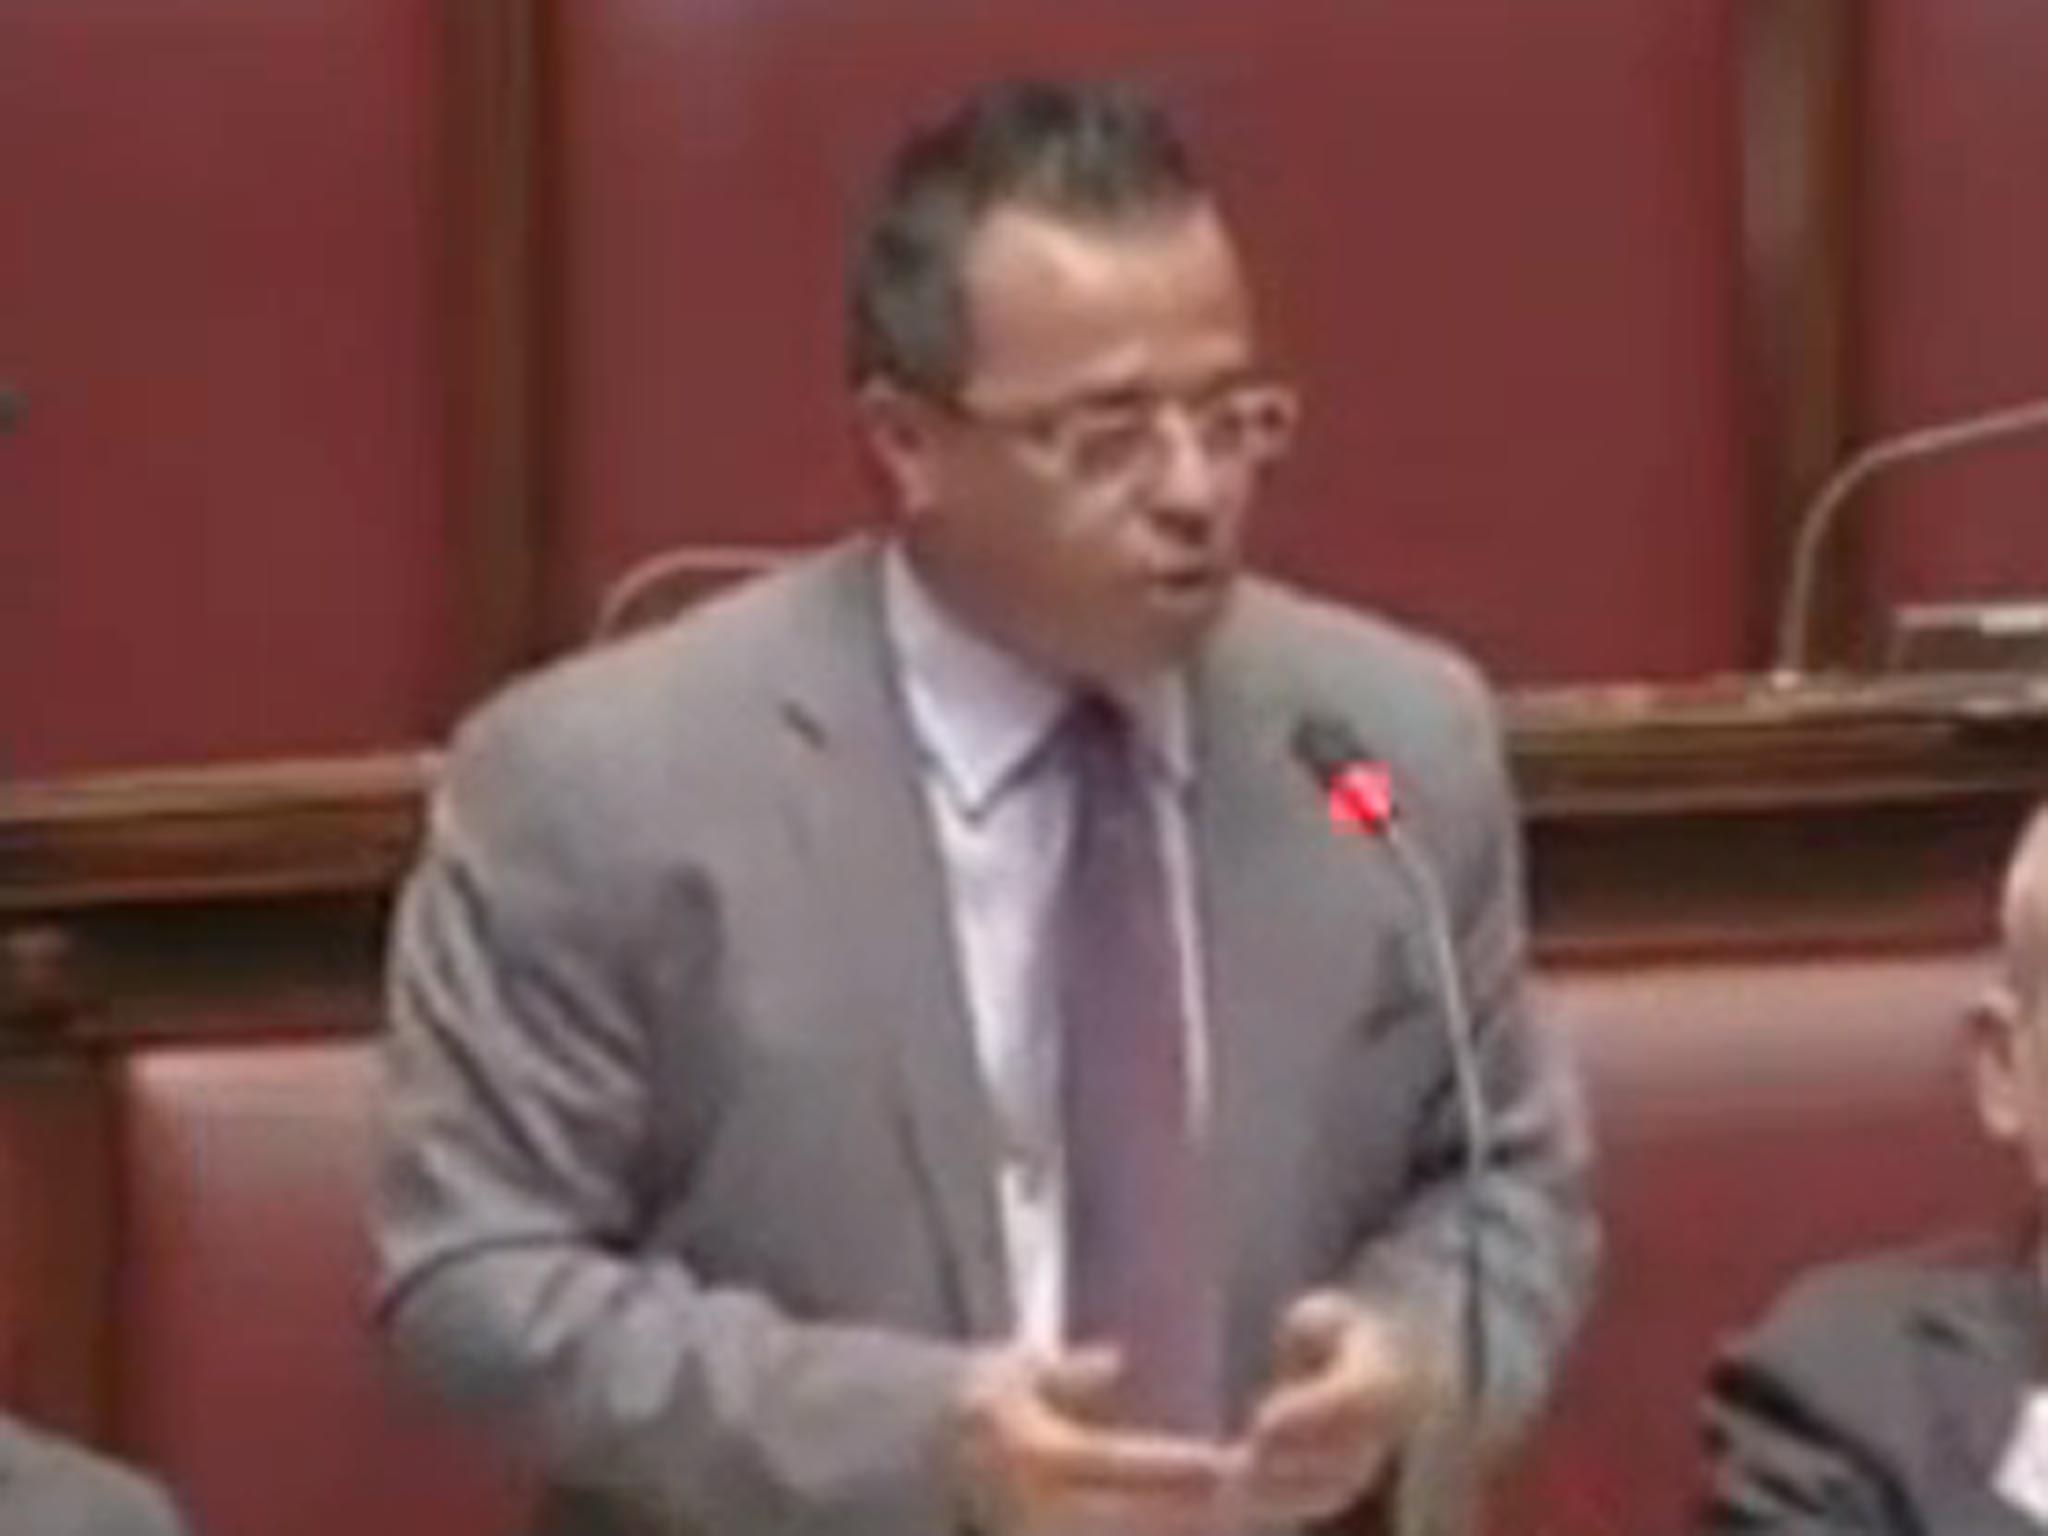 Italian MP Gianluca Buonanno speaking about anti-immigration policy in Parliament when he made the comments